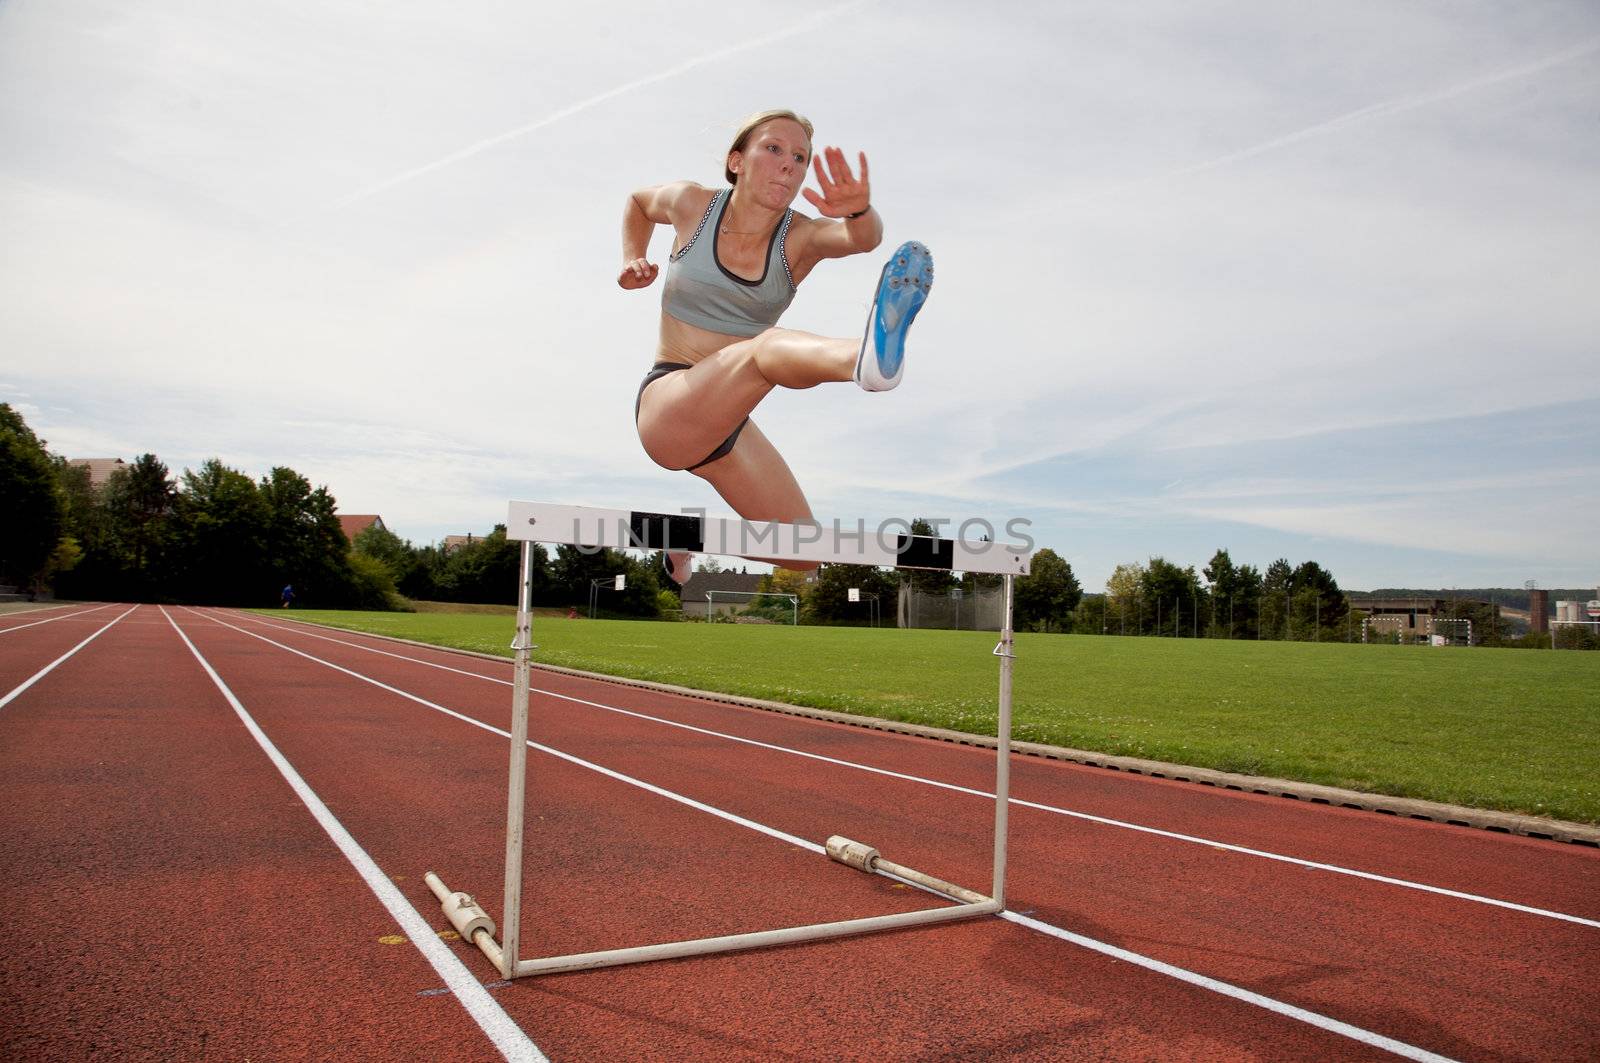 A young athlete jumping over a hurdle
